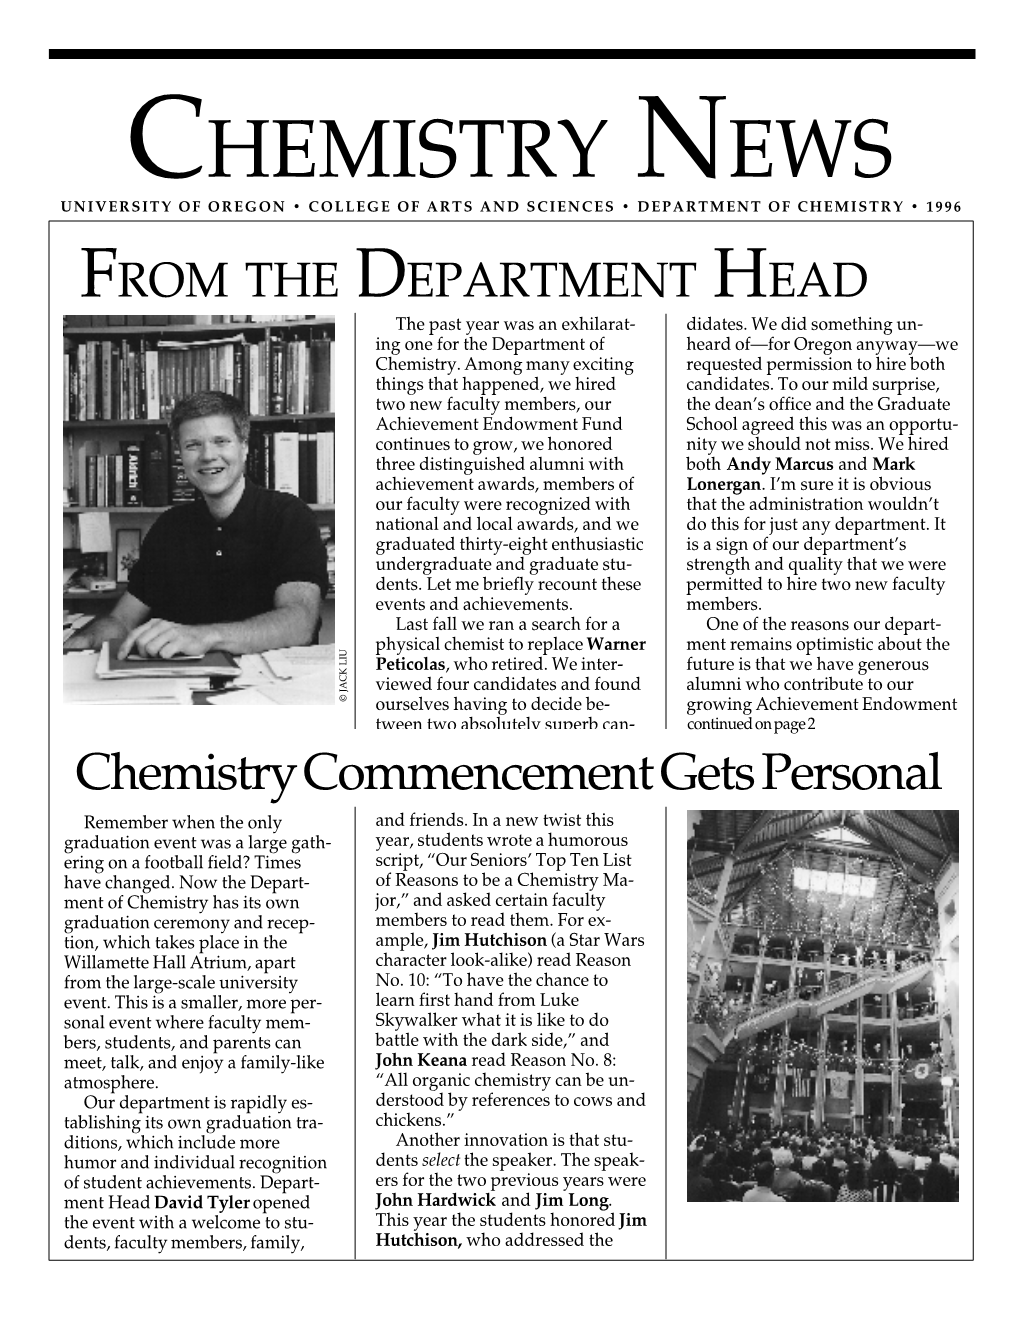 CHEMISTRY NEWS UNIVERSITY of OREGON • COLLEGE of ARTS and SCIENCES • DEPARTMENT of CHEMISTRY • 1996 from the DEPARTMENT HEAD the Past Year Was an Exhilarat- Didates